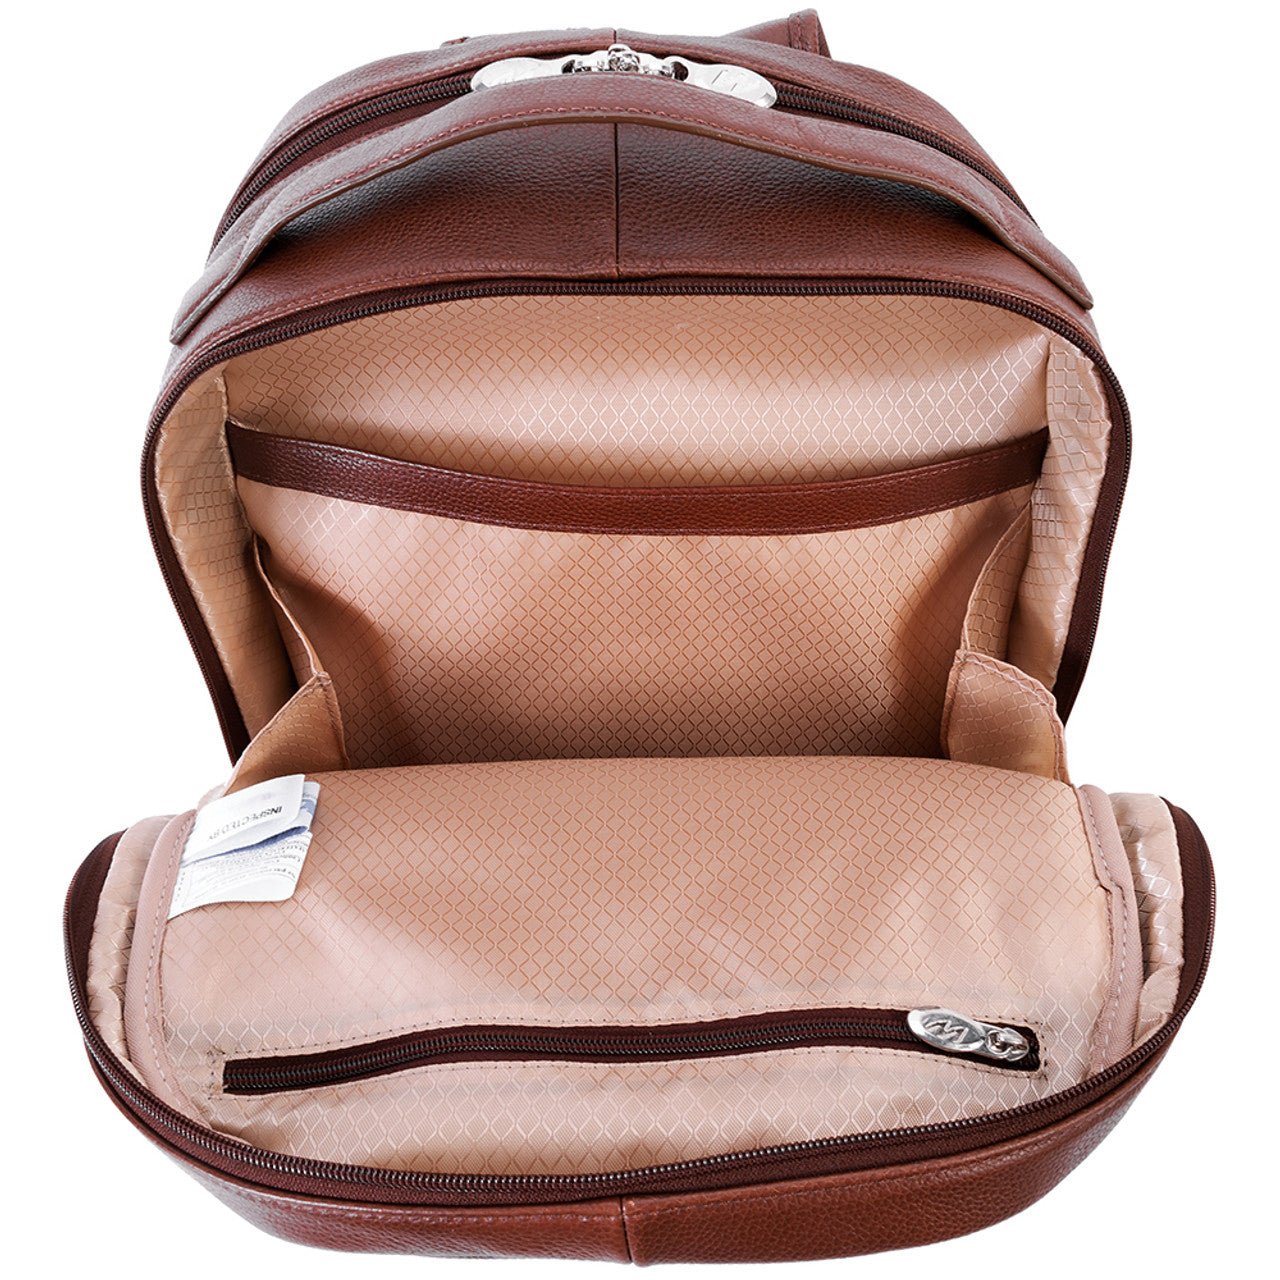 Parker Dual Compartment Laptop Backpack - Leather Loom